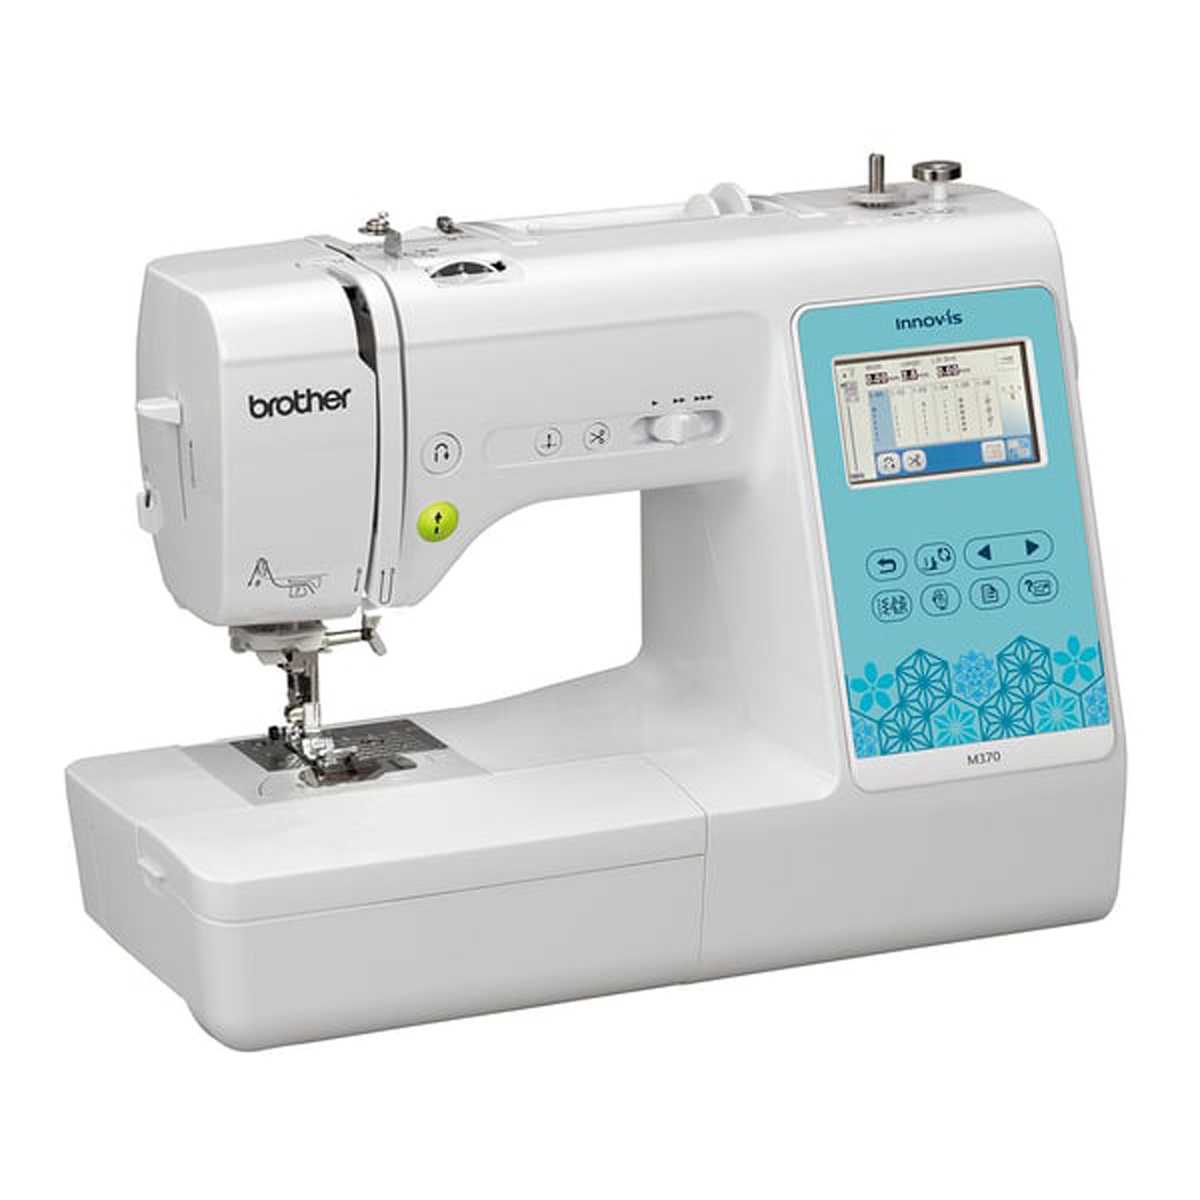 Brother Sewing Machine, White, M370